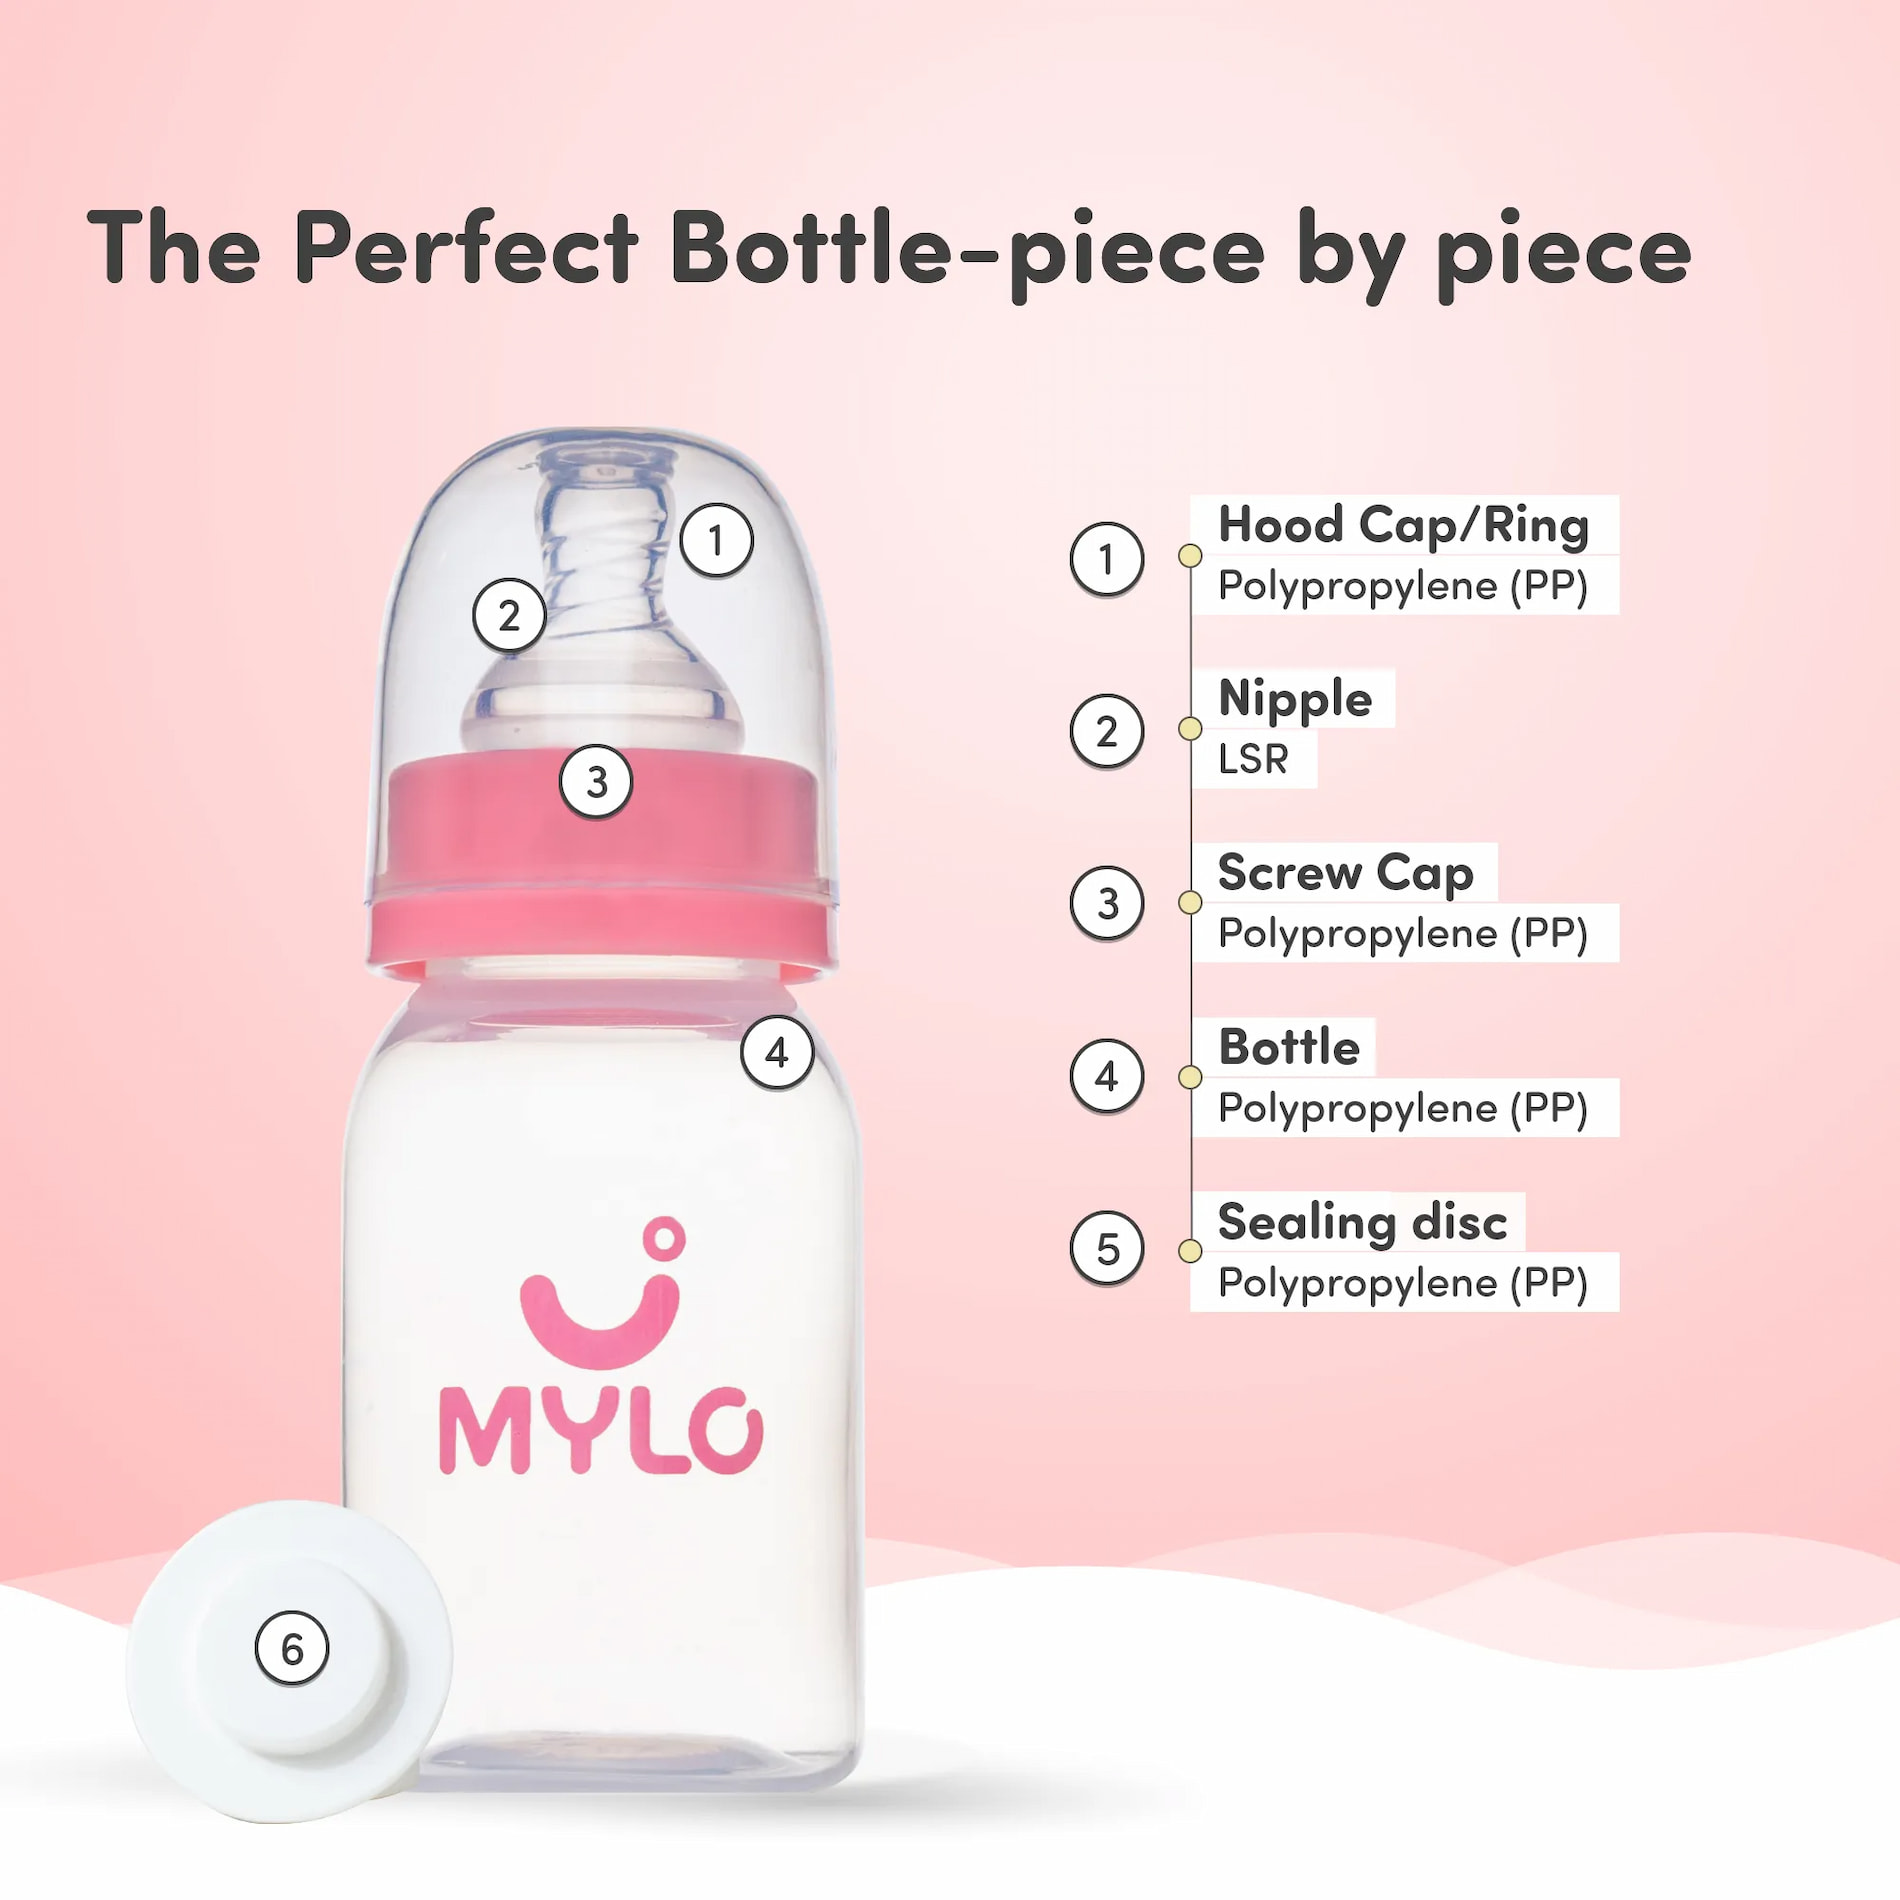 2-in-1 Baby Feeding Bottle | BPA Free with Anti-Colic Nipple | Easy Flow Neck Design - Pink & Blue 125ml & 250ml